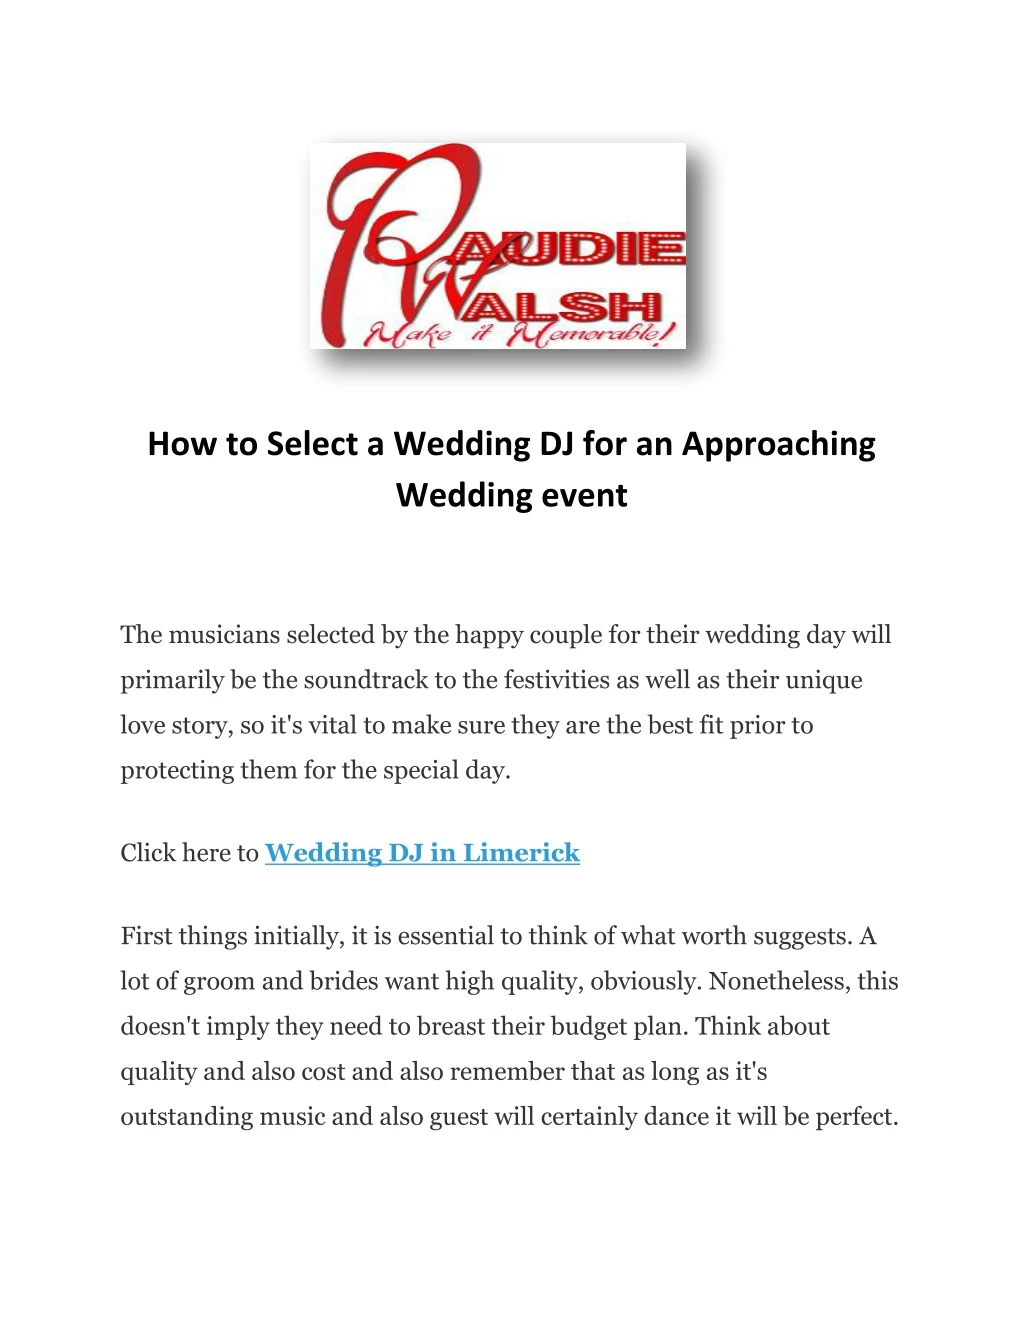 how to select a wedding dj for an approaching